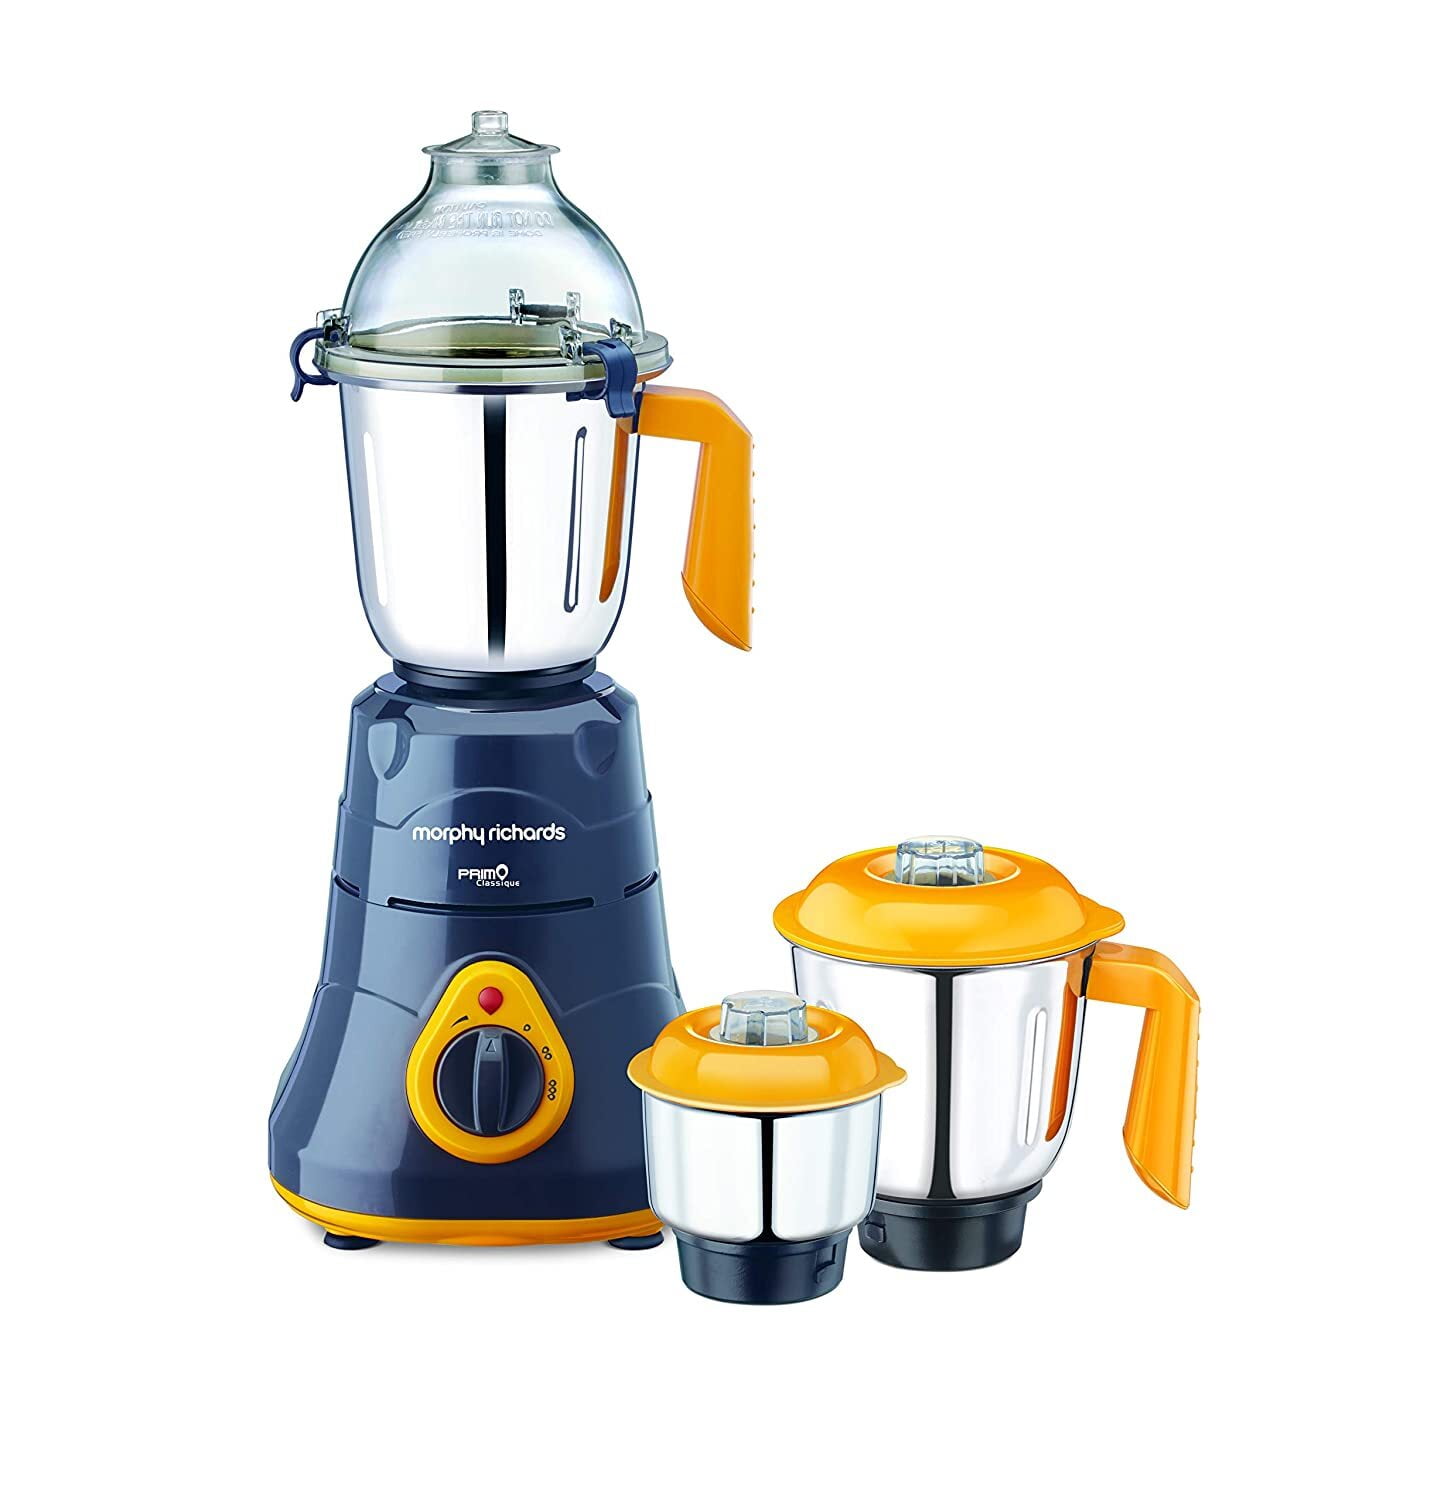 Morphy Richards Primo Classique Mixer Grinder On Dillimall.Com